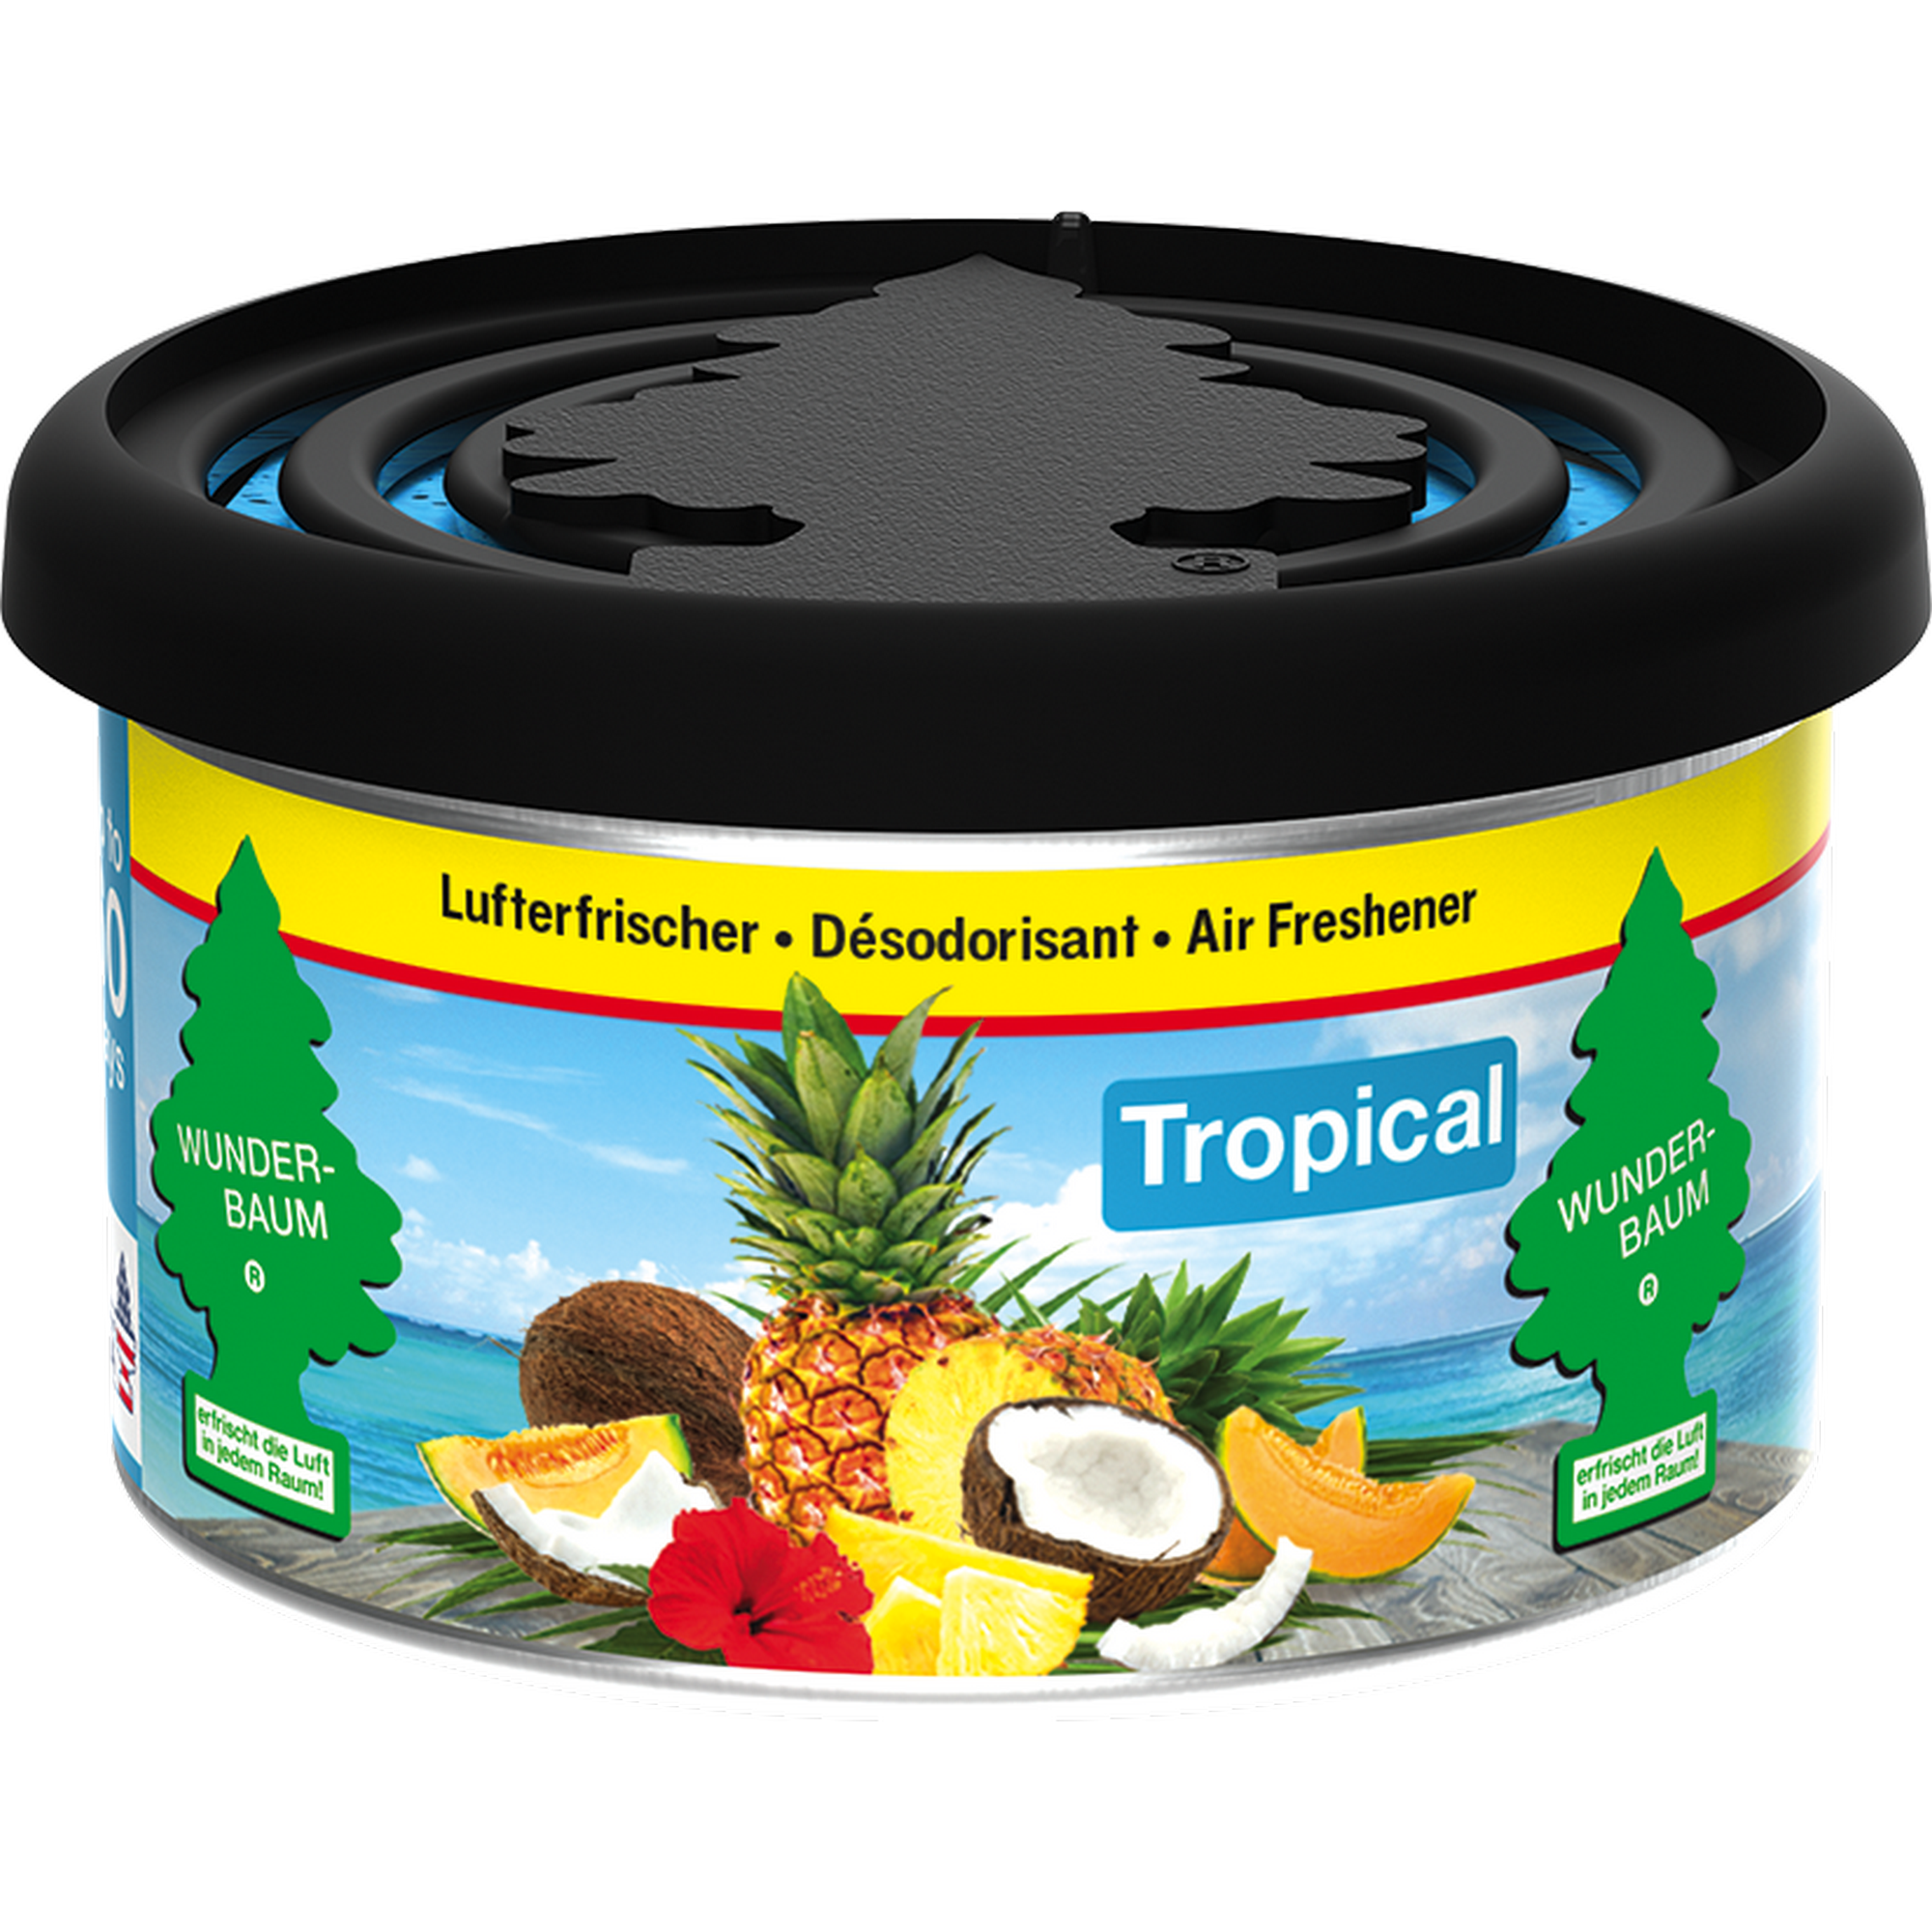 Lufterfrischer-Dose 'Tropical' + product picture